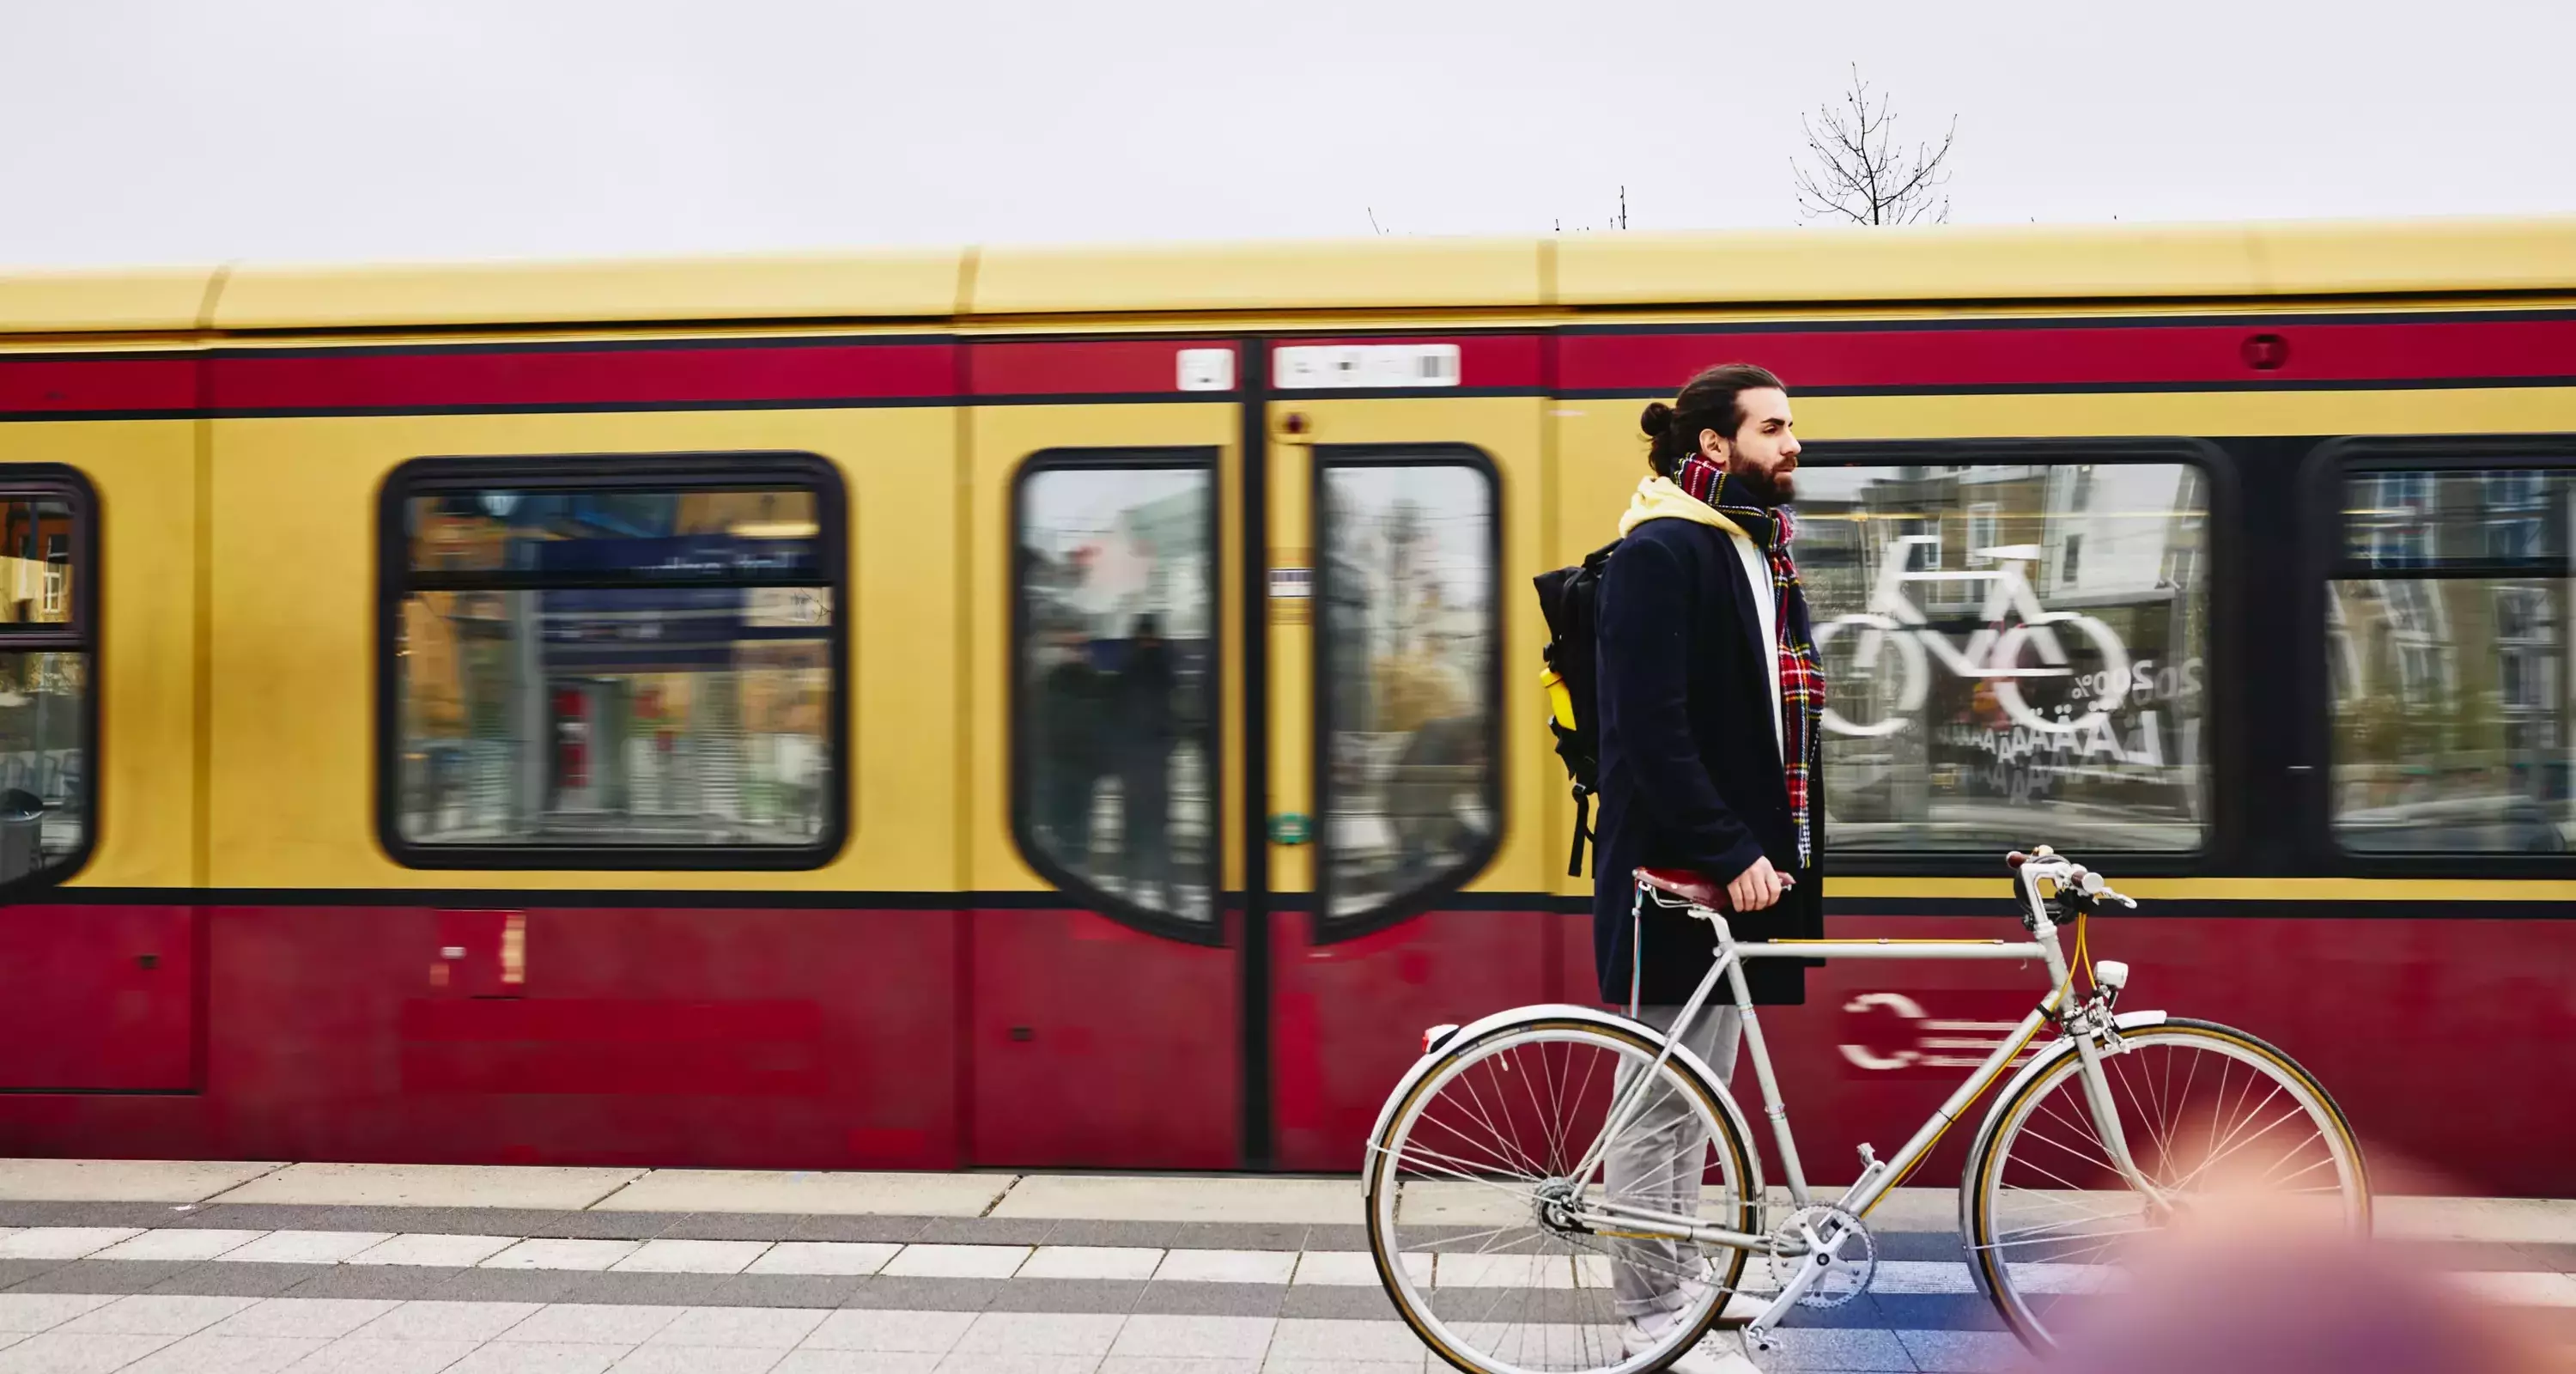 male standing on a train platform with his bike. Train in the background.
